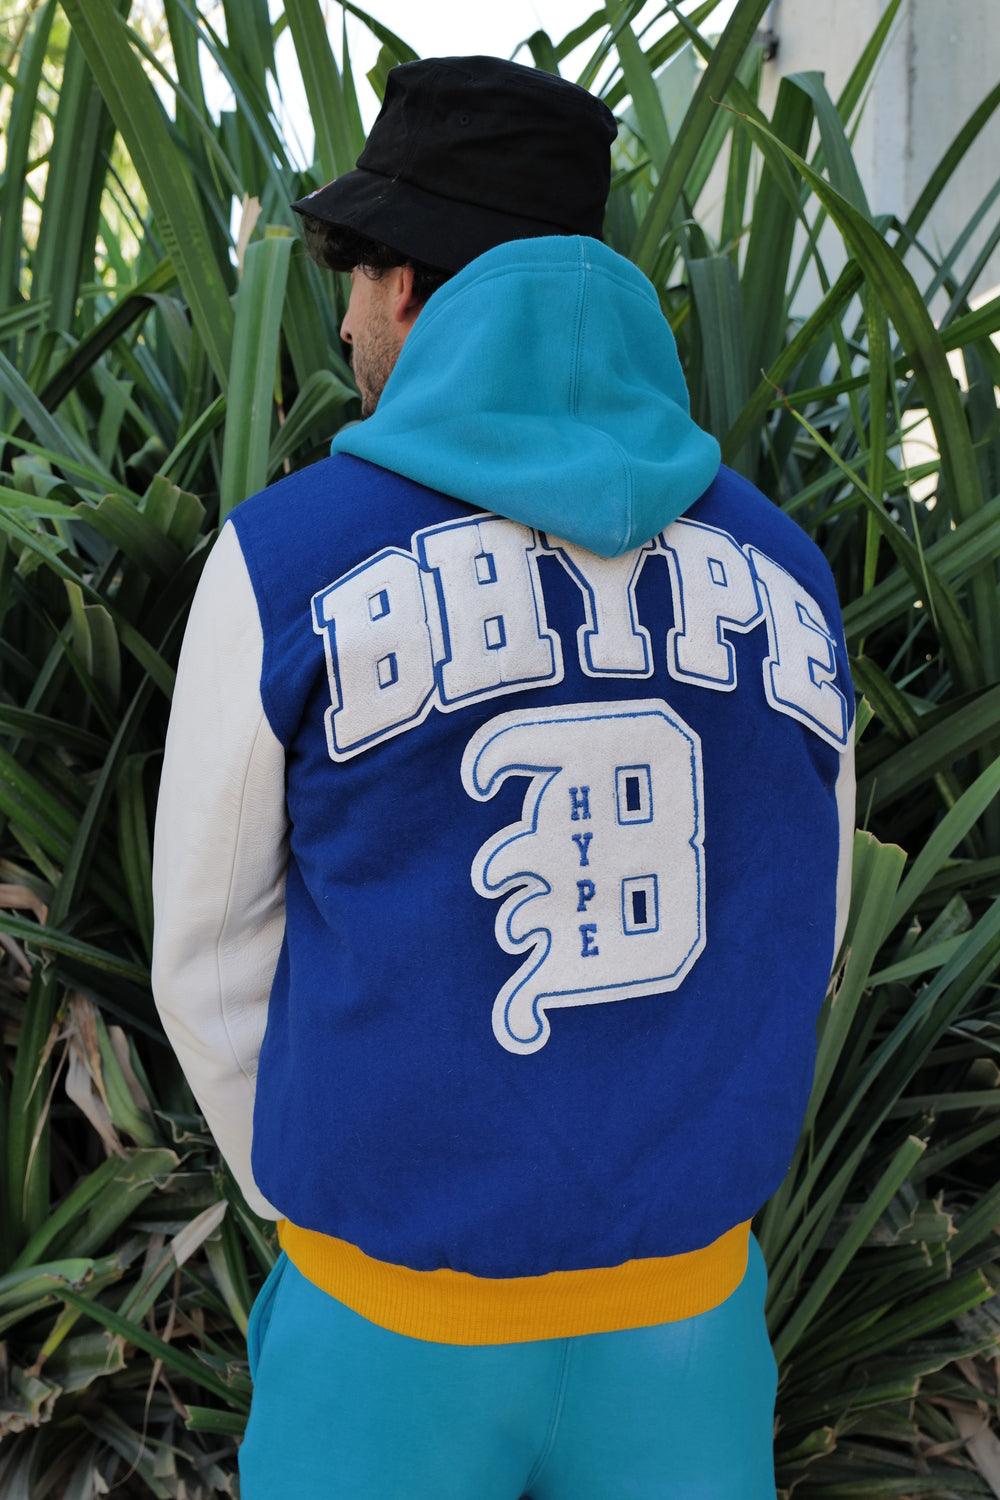 BHYPE VARSITY COLLECTION JACKET BLUE/WHITE - B-Hype Society